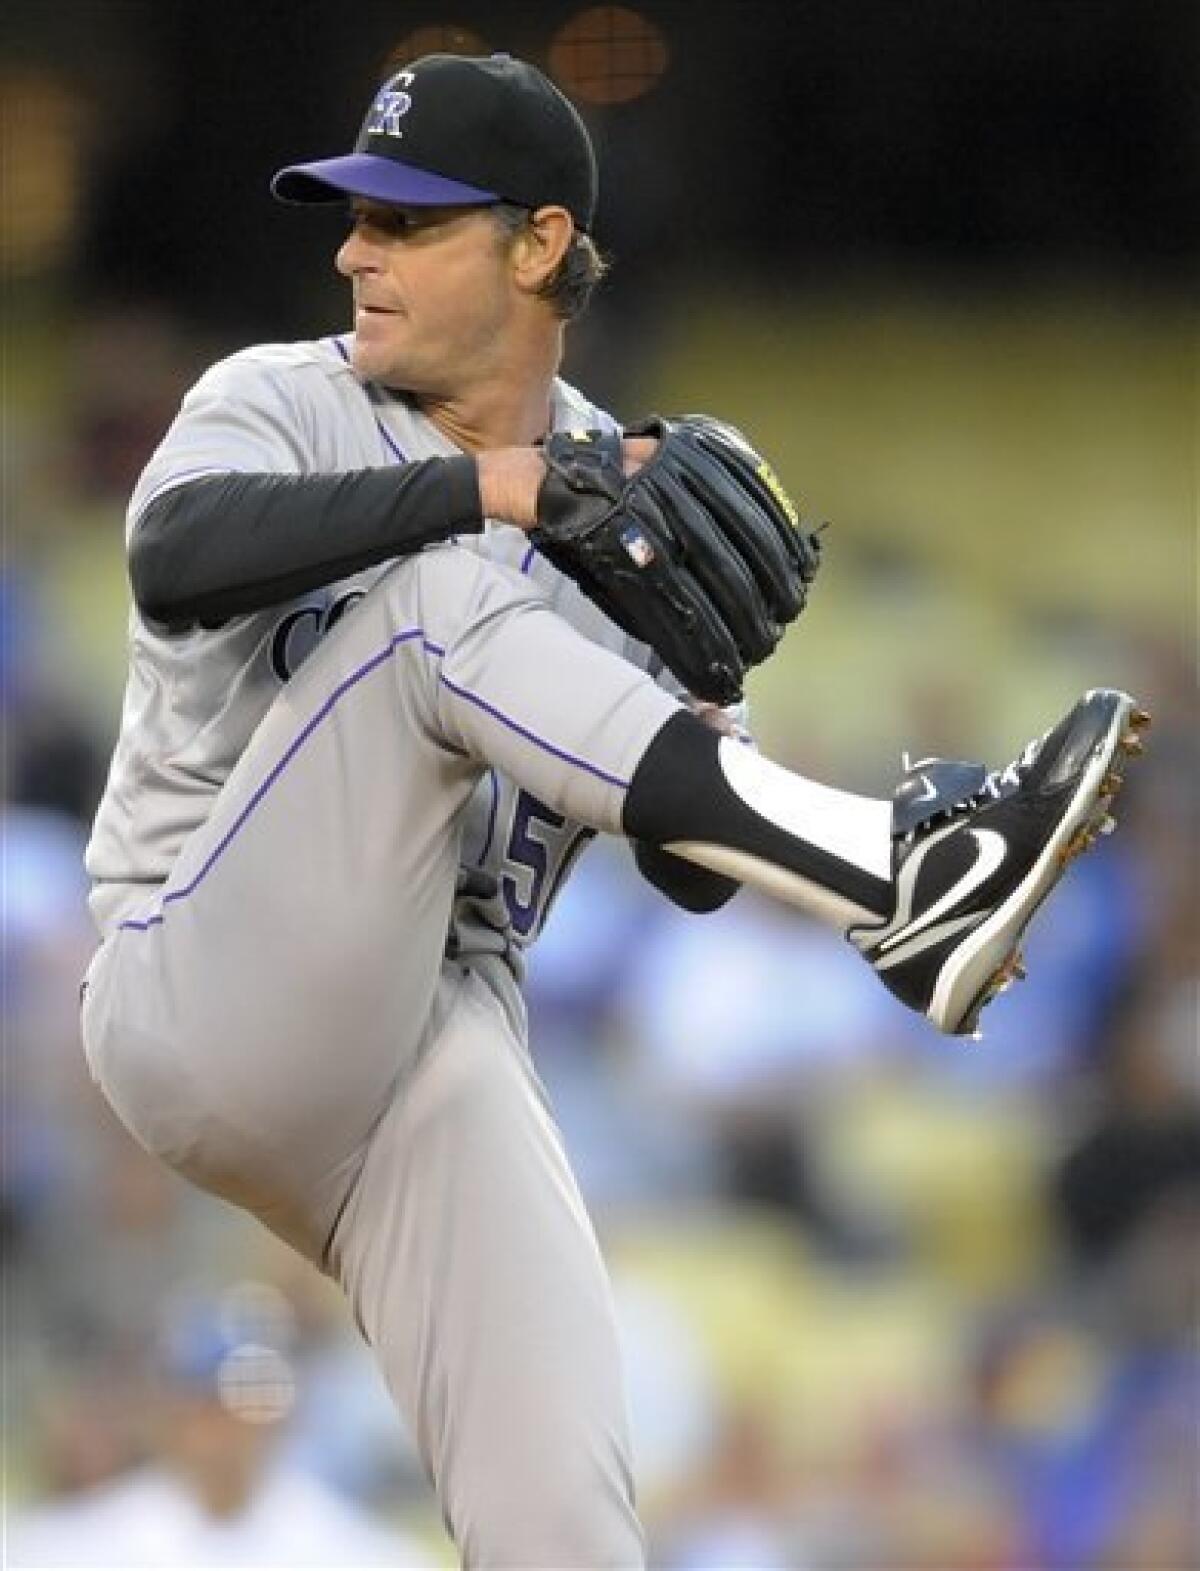 Jamie Moyer was a talented, underrated pitcher